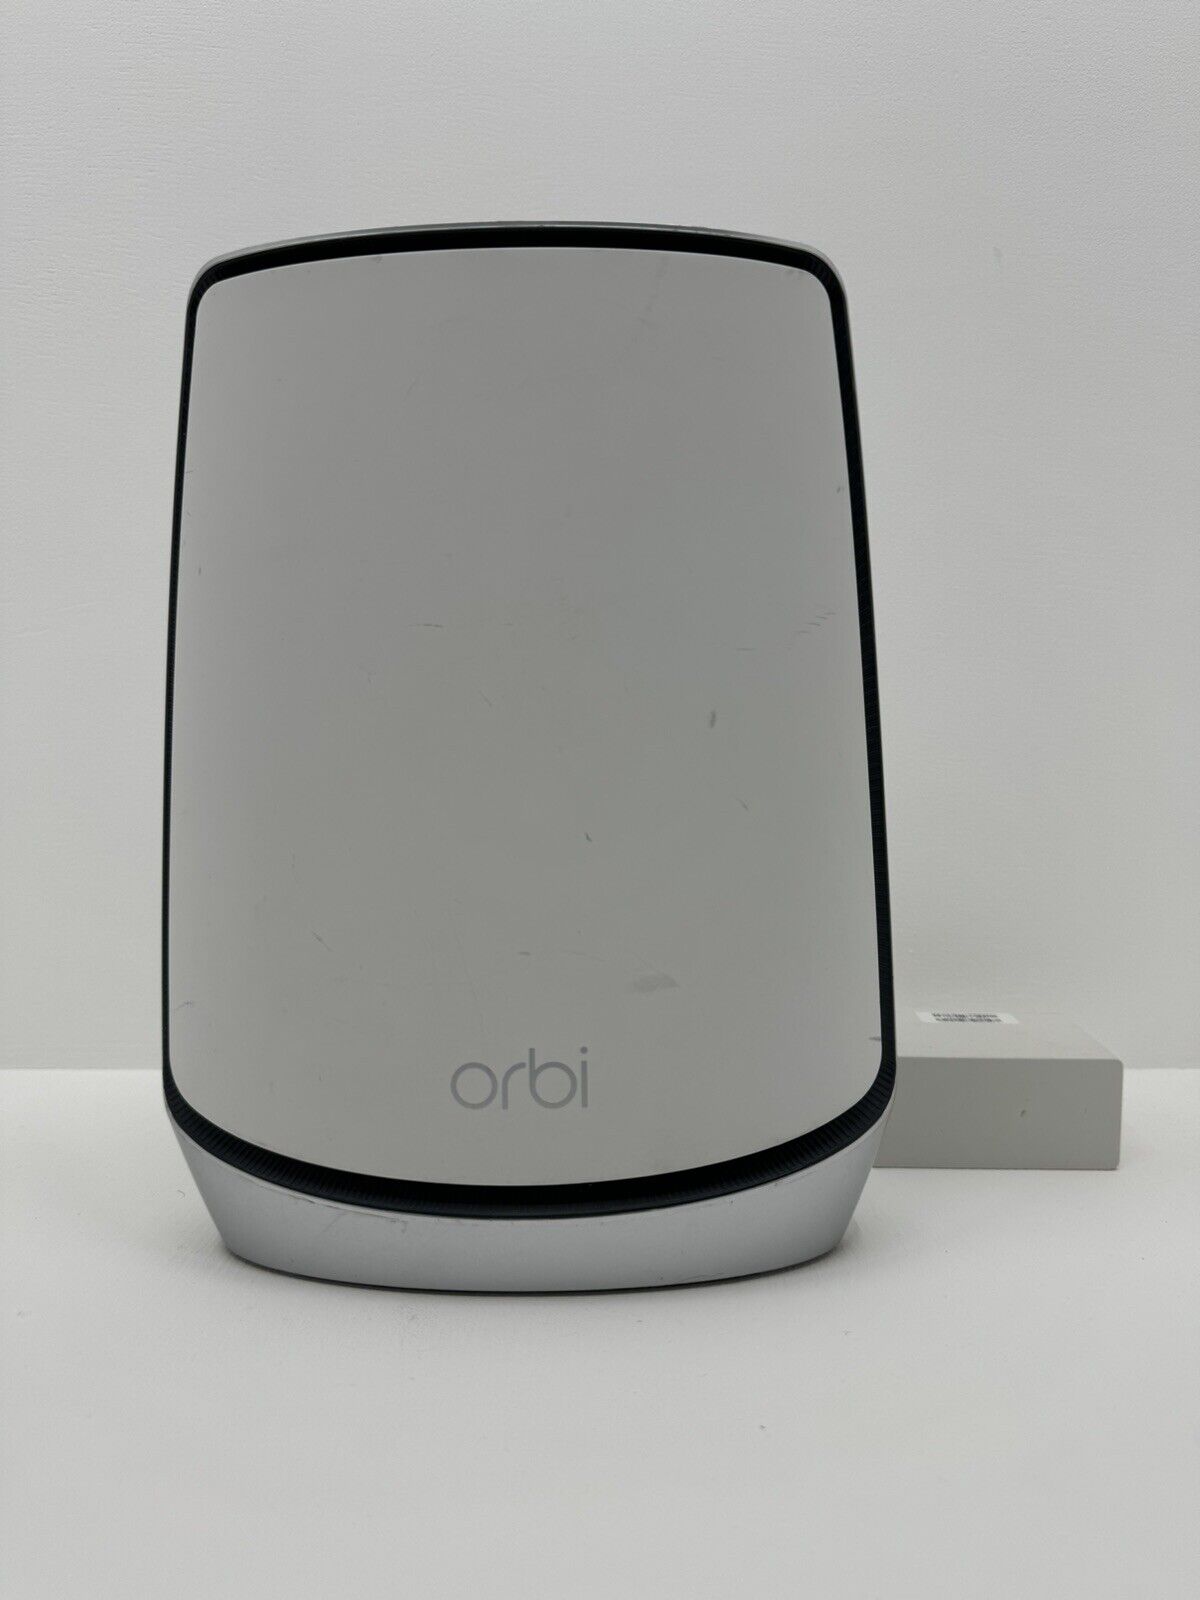 NETGEAR Orbi RBR850 Tri-Band Mesh WiFi 6 AX6000 Router - Router Only